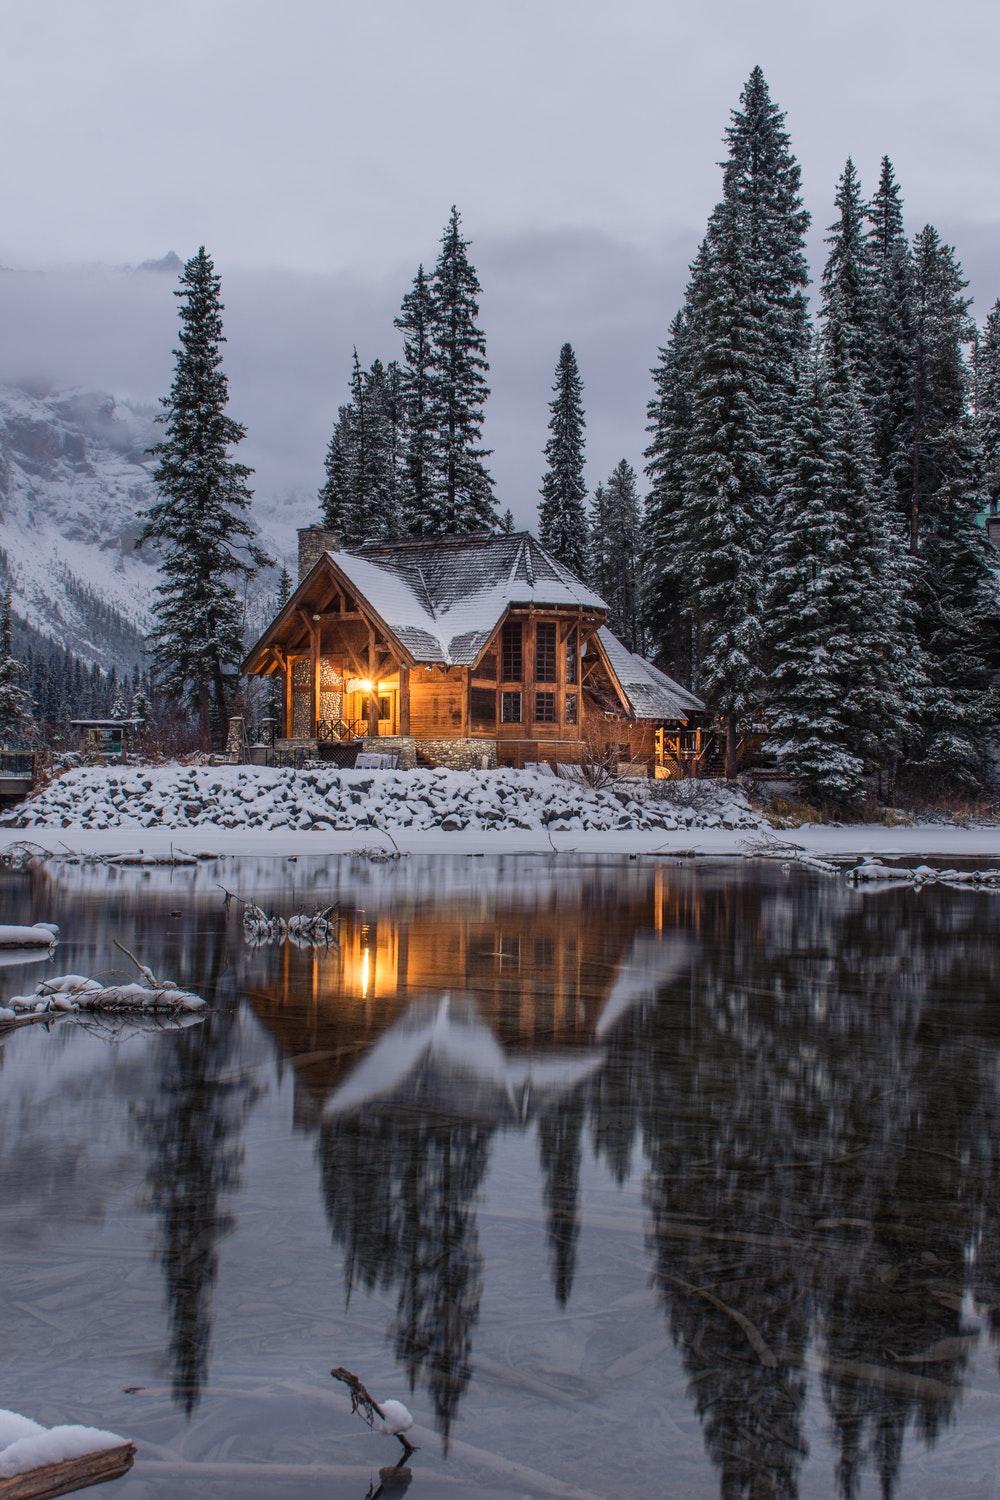 Winter House Picture. Download Free Image